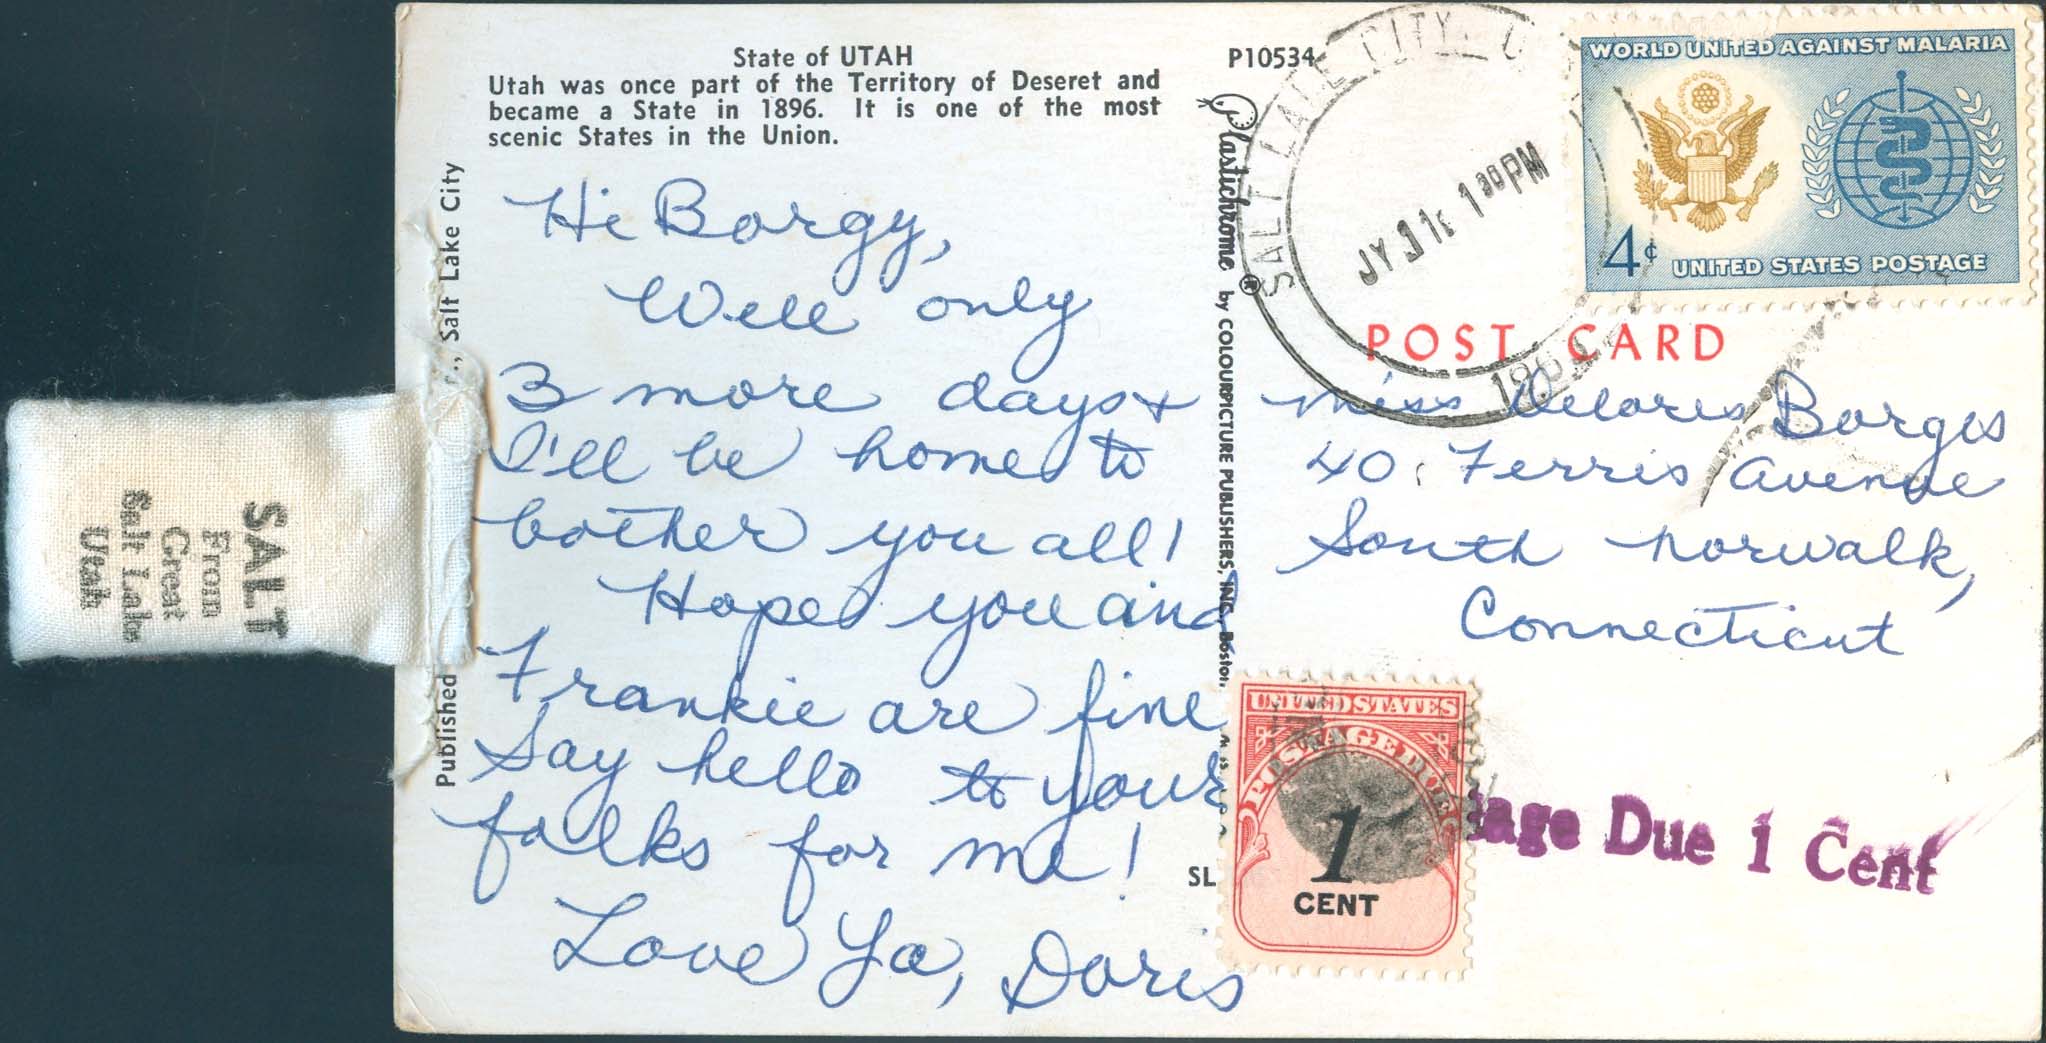 1963, July 31st. Salt Lake City, UT to South Norwalk, CN.<br />Sender attempting to send postcard at the 4¢ postcard rate but with the salt bag was attached, the letter rate applied. Postage Due 1 ¢